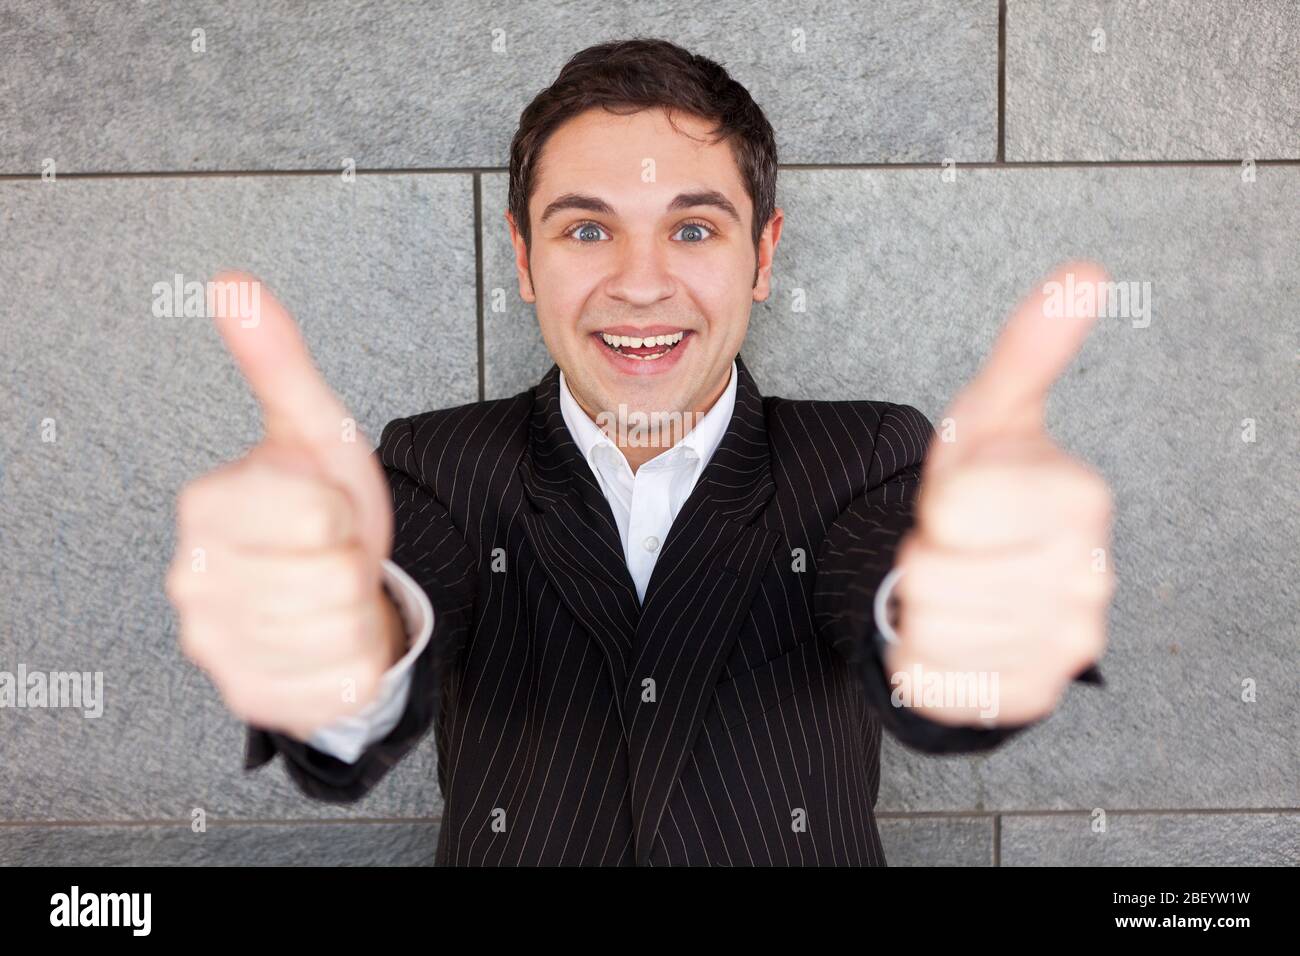 Laughing manager leaning against wall holds both thumbs up Stock Photo